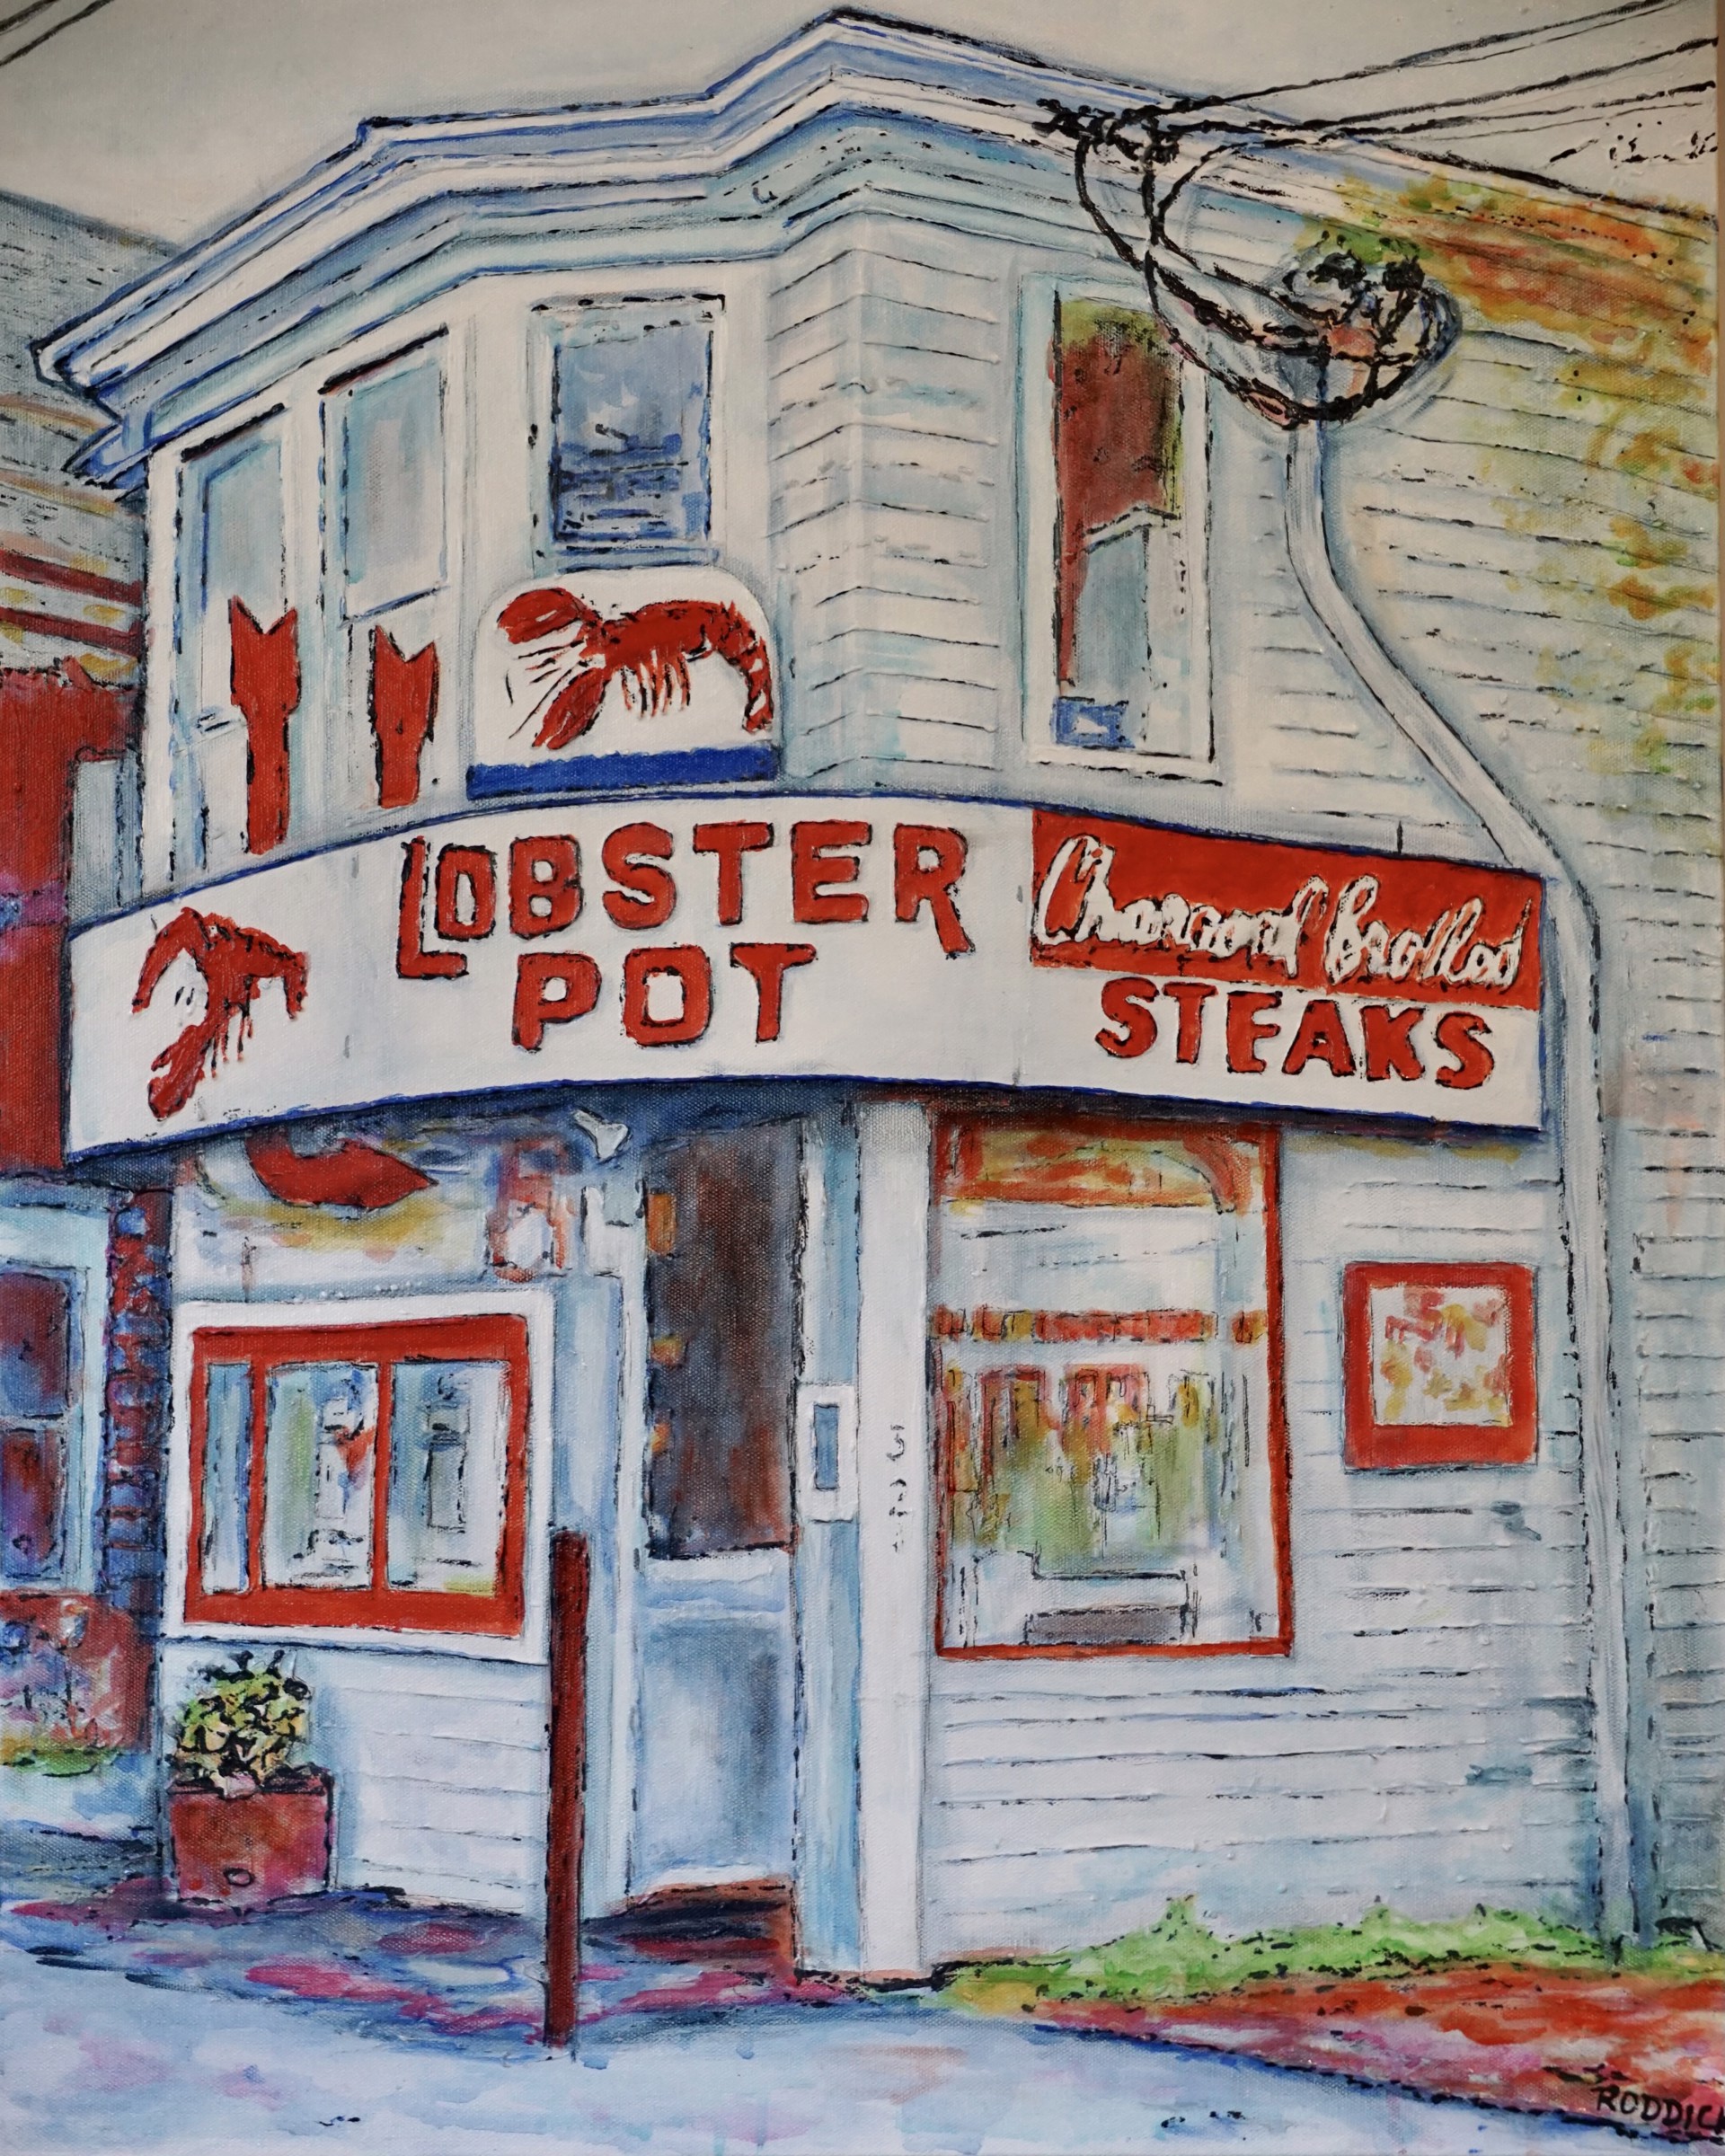 The Lobster Pot by Christopher Roddick